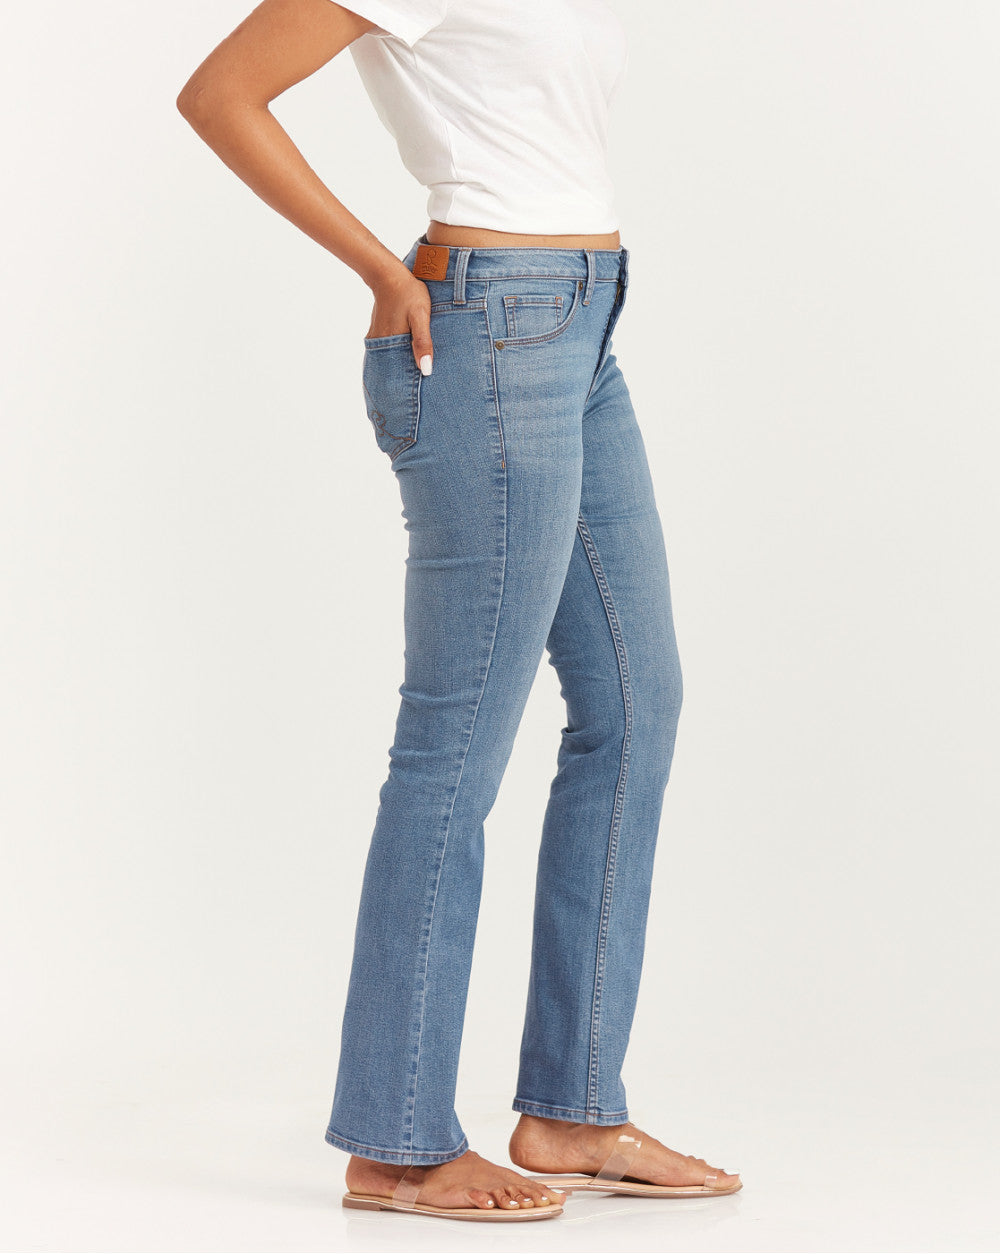 Fit And Flare Mid Waist Jeans - Summer Blue